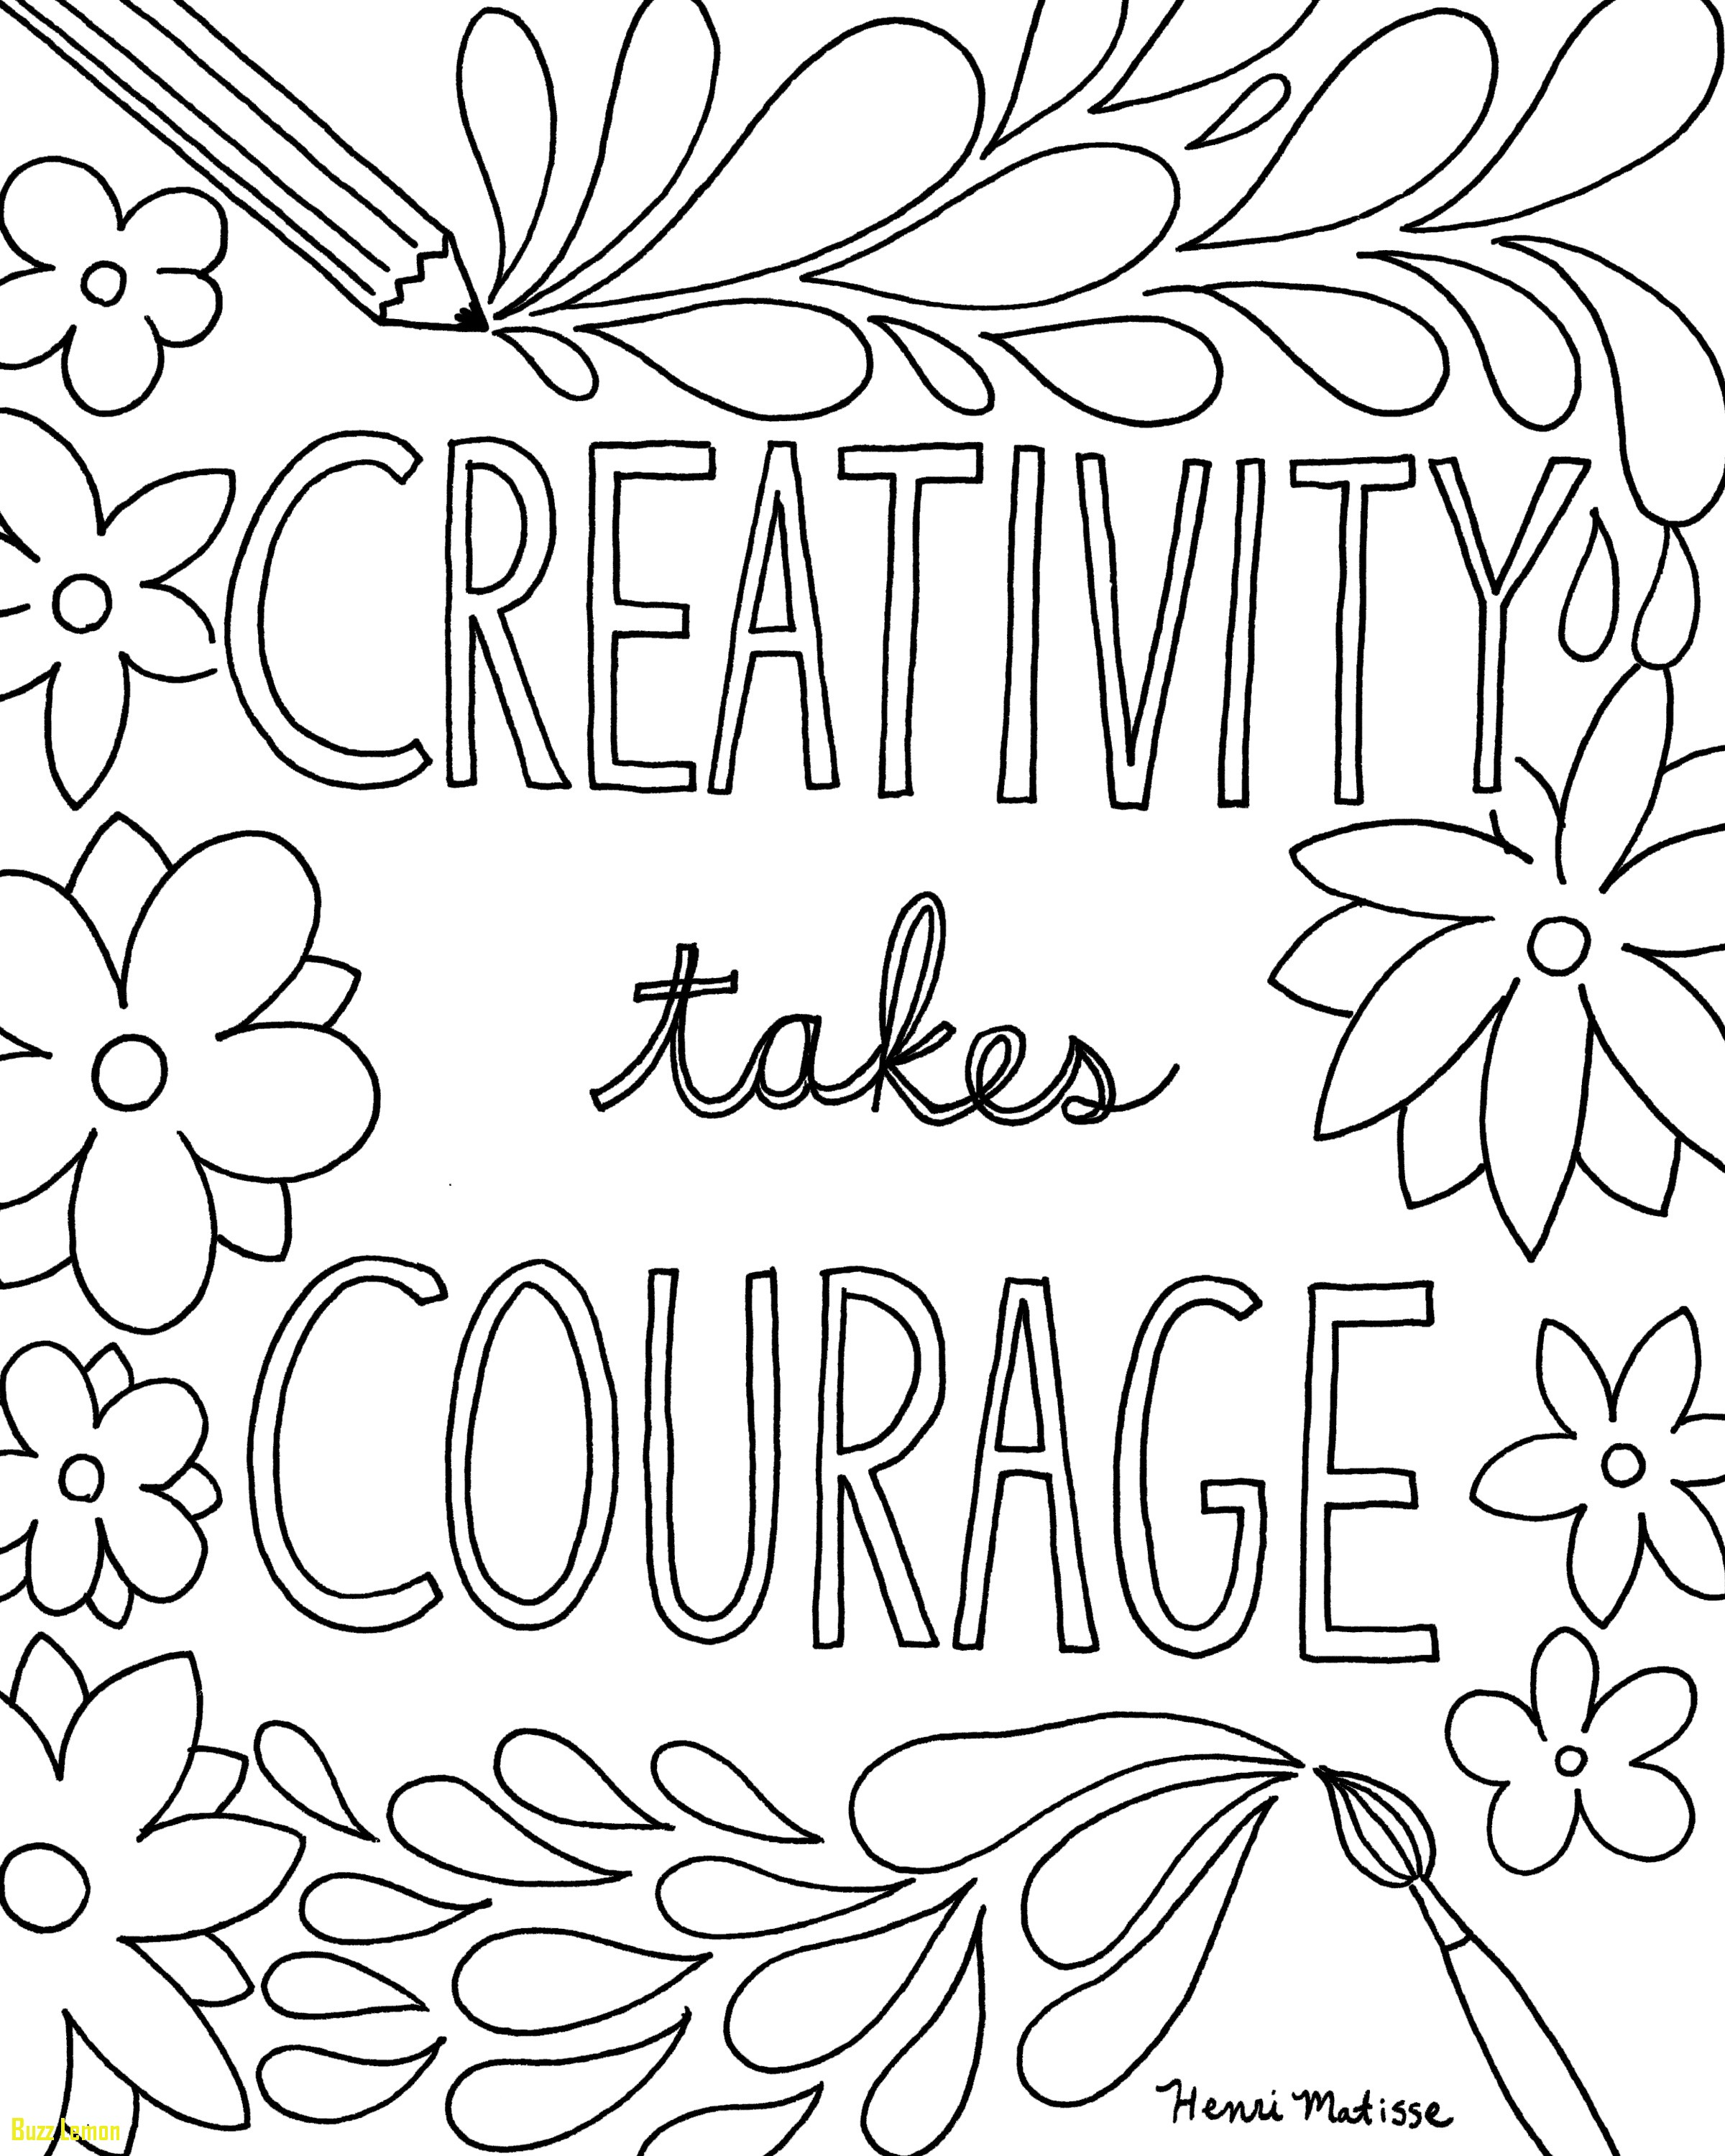 Free Coloring Page Websites at GetDrawings | Free download